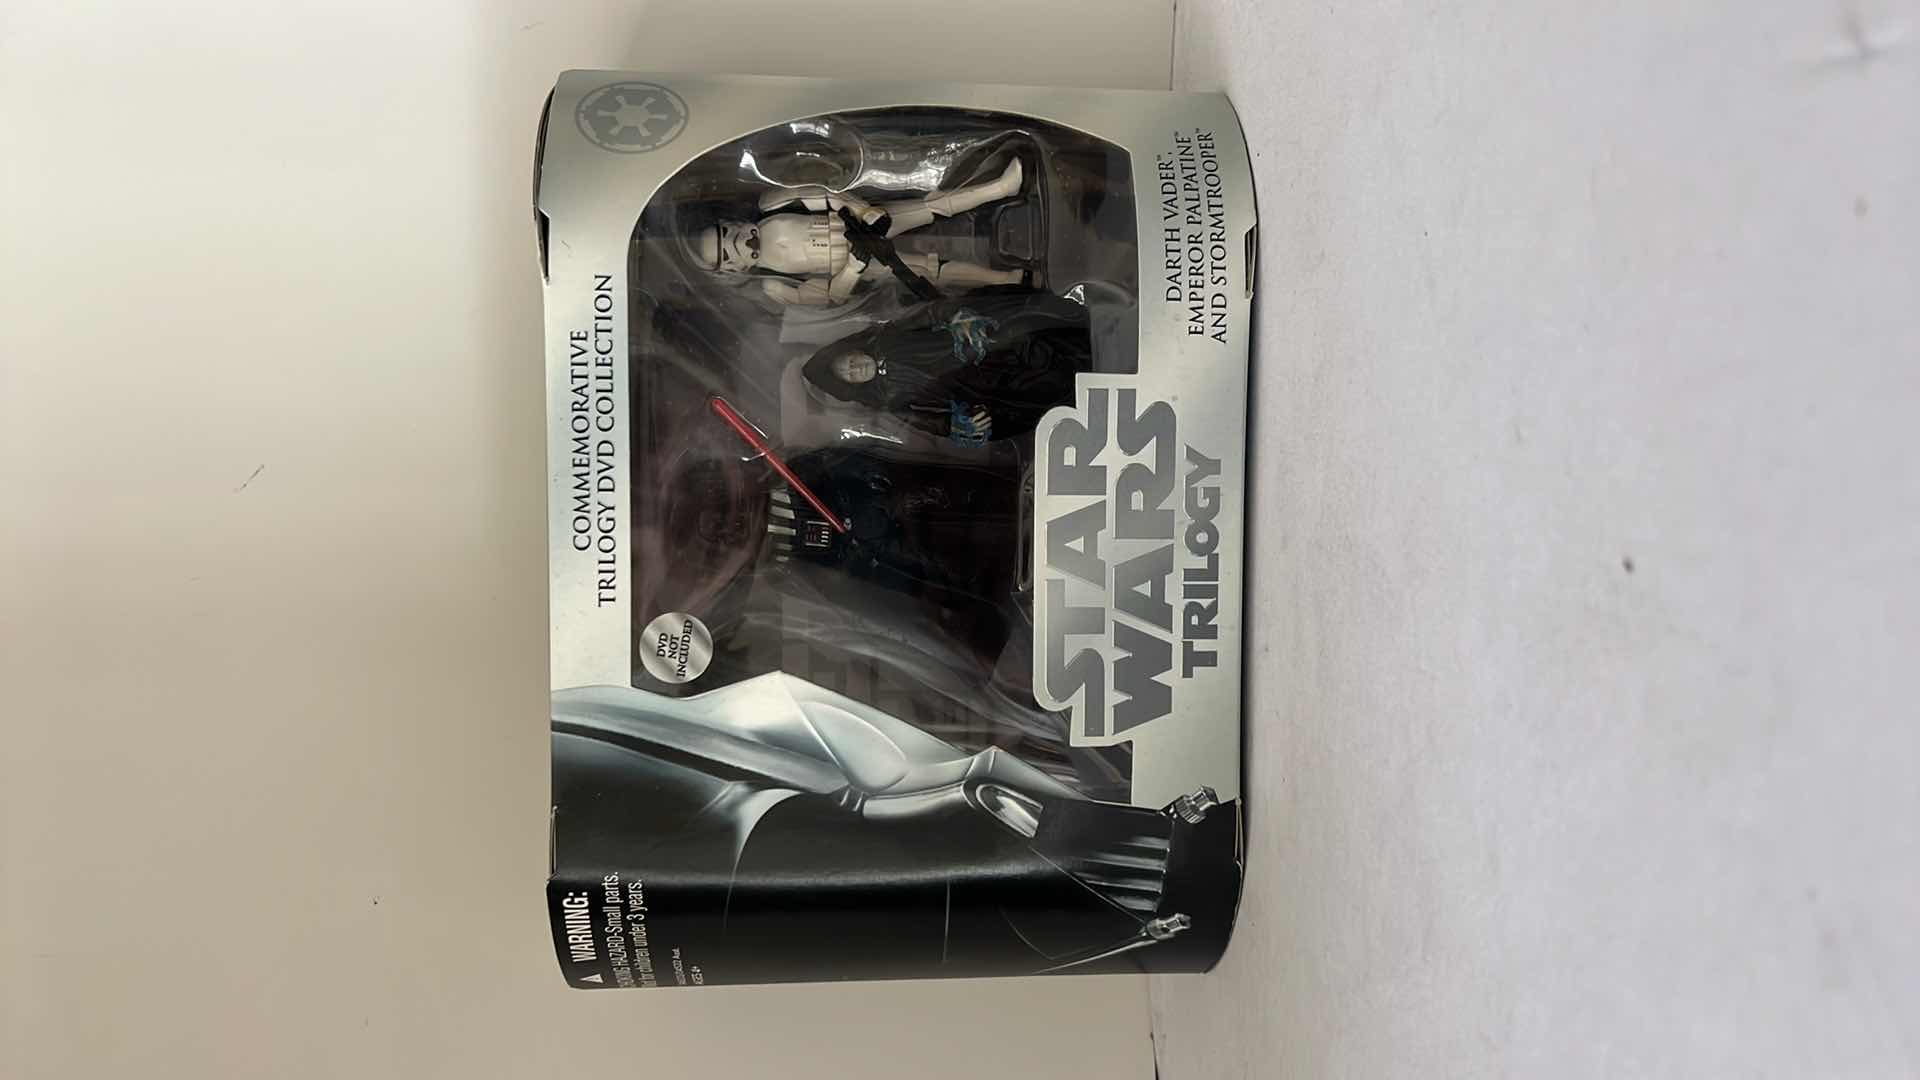 Photo 1 of BRAND NEW STAR WARS COMMEMORATIVE TRILOGY DVD COLLECTION (DVD NOT INCLUDED) FIGURINES $20